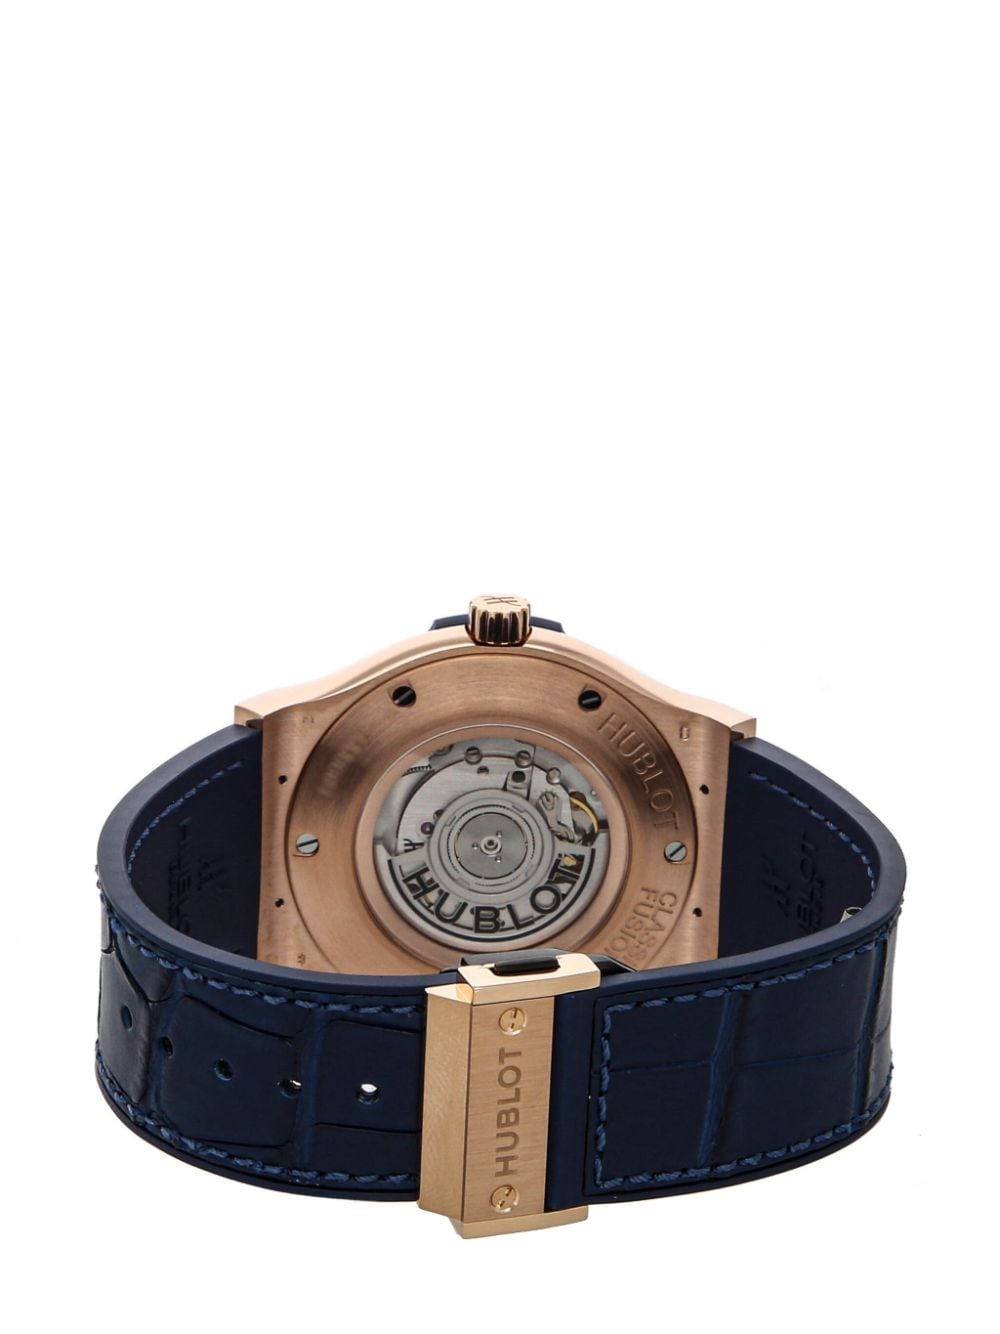 Pre-owned Hublot  Classic Fusion Blue King Gold 45mm